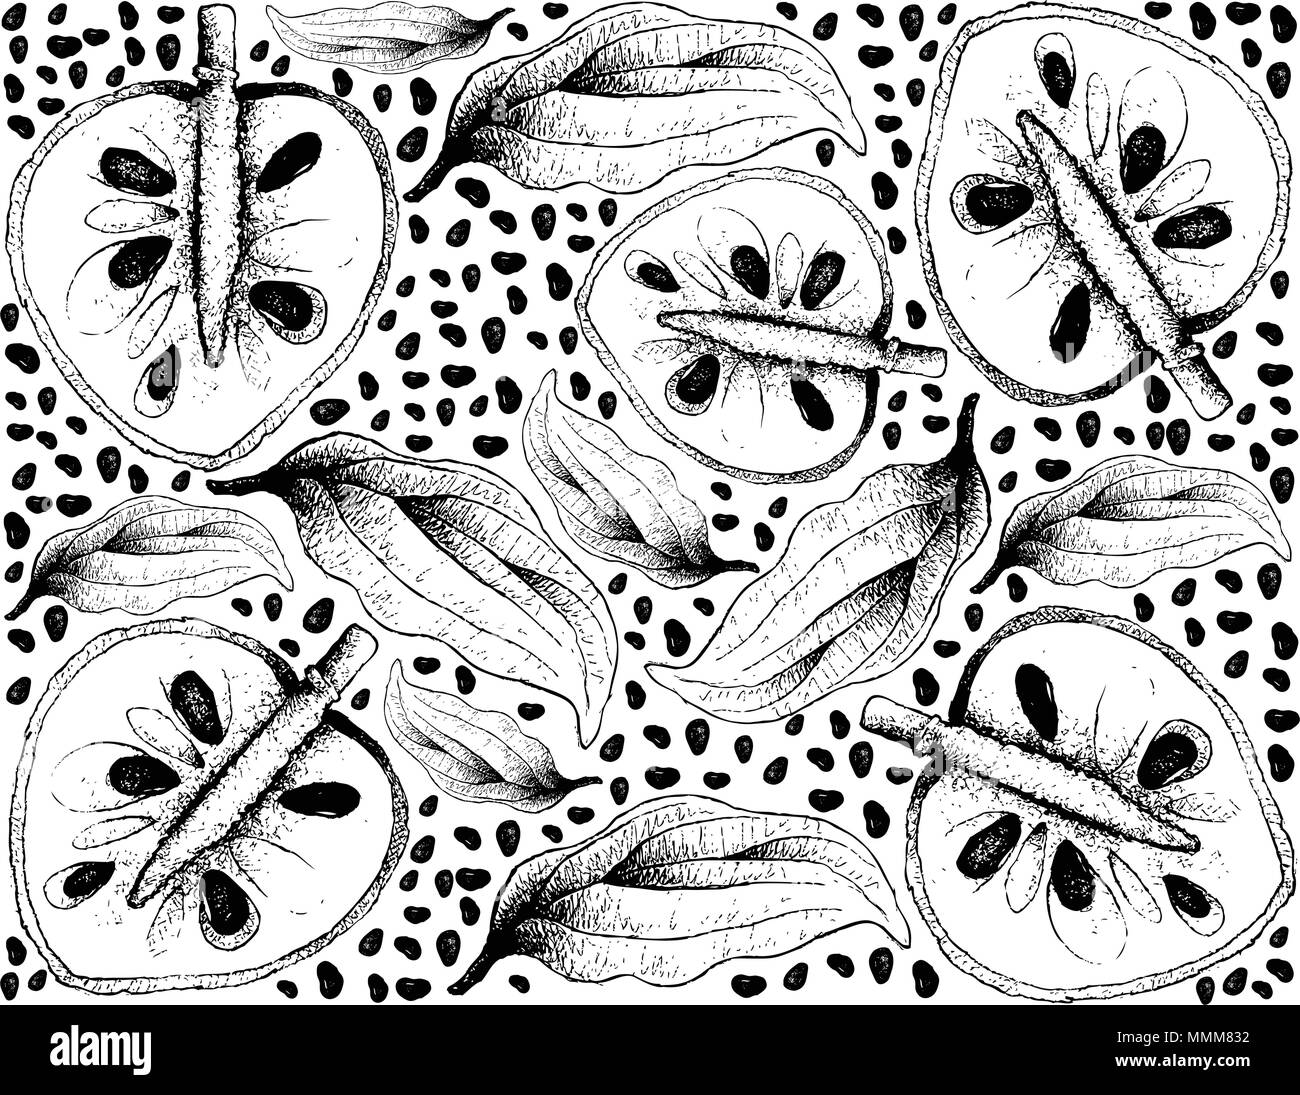 Tropical Fruit, Illustration Wallpaper of Hand Drawn Sketch of Cherimoya, Annona Cherimola Fruit Isolated on White Background. A Rich Source of Vitami Stock Vector